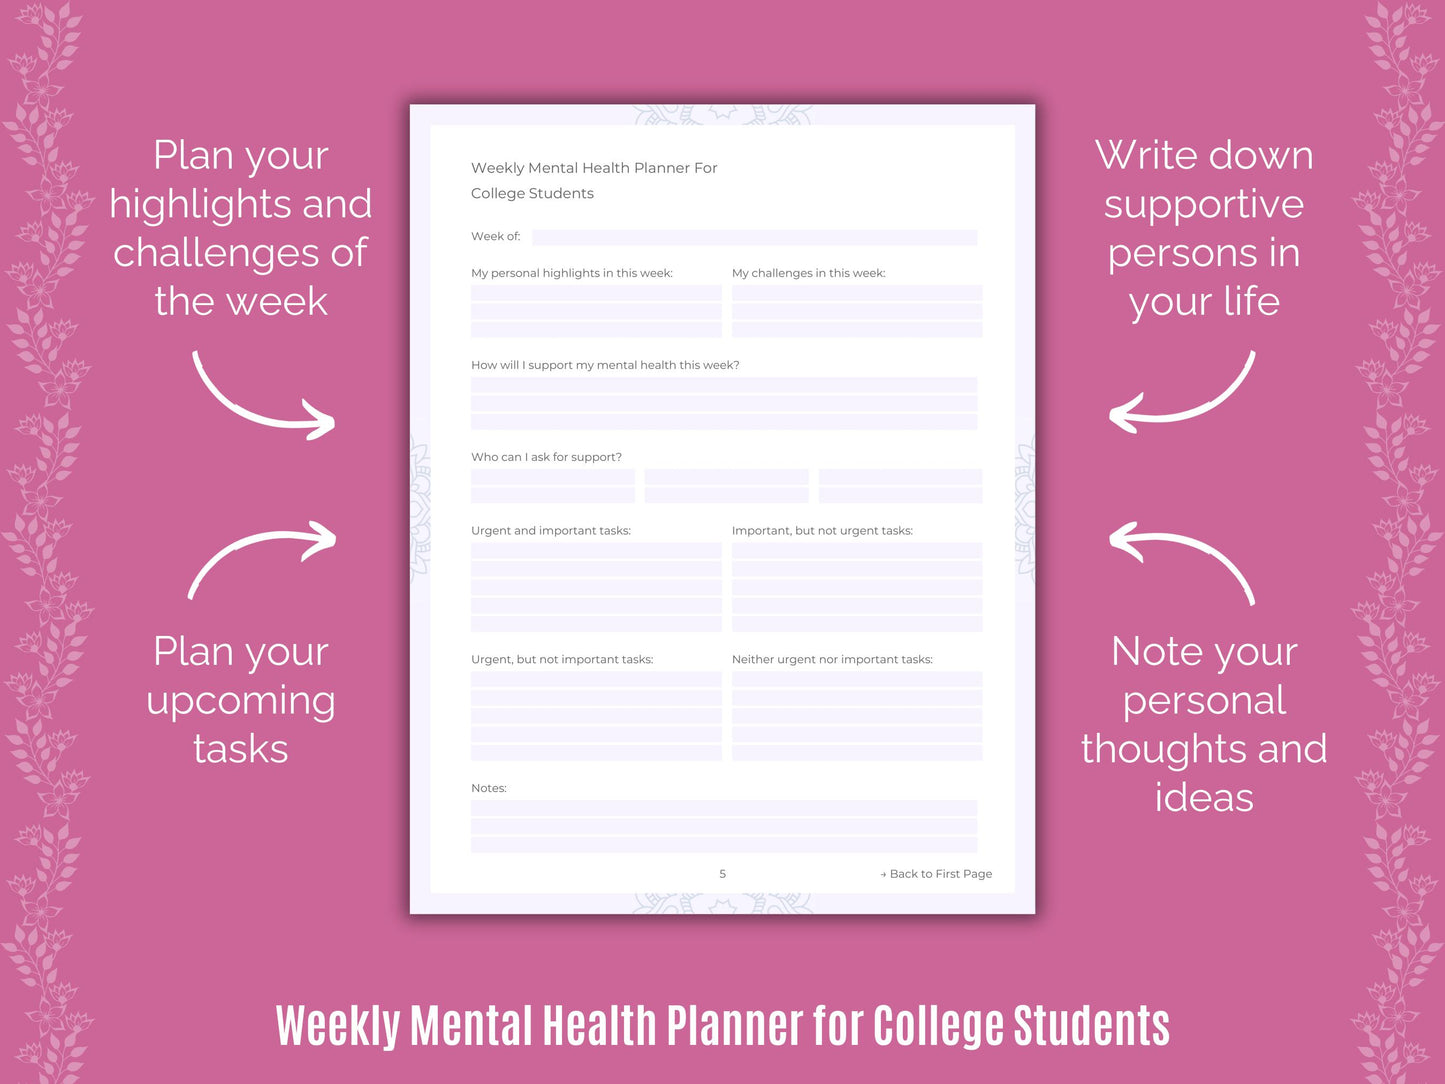 College Goal Setting, College Cheat Sheet, College Workbooks, College Journaling, Student, College Notes, College Templates, College Mental Health, College Therapy, College Resources, College Tools, College Journals, College Counseling, College Planners